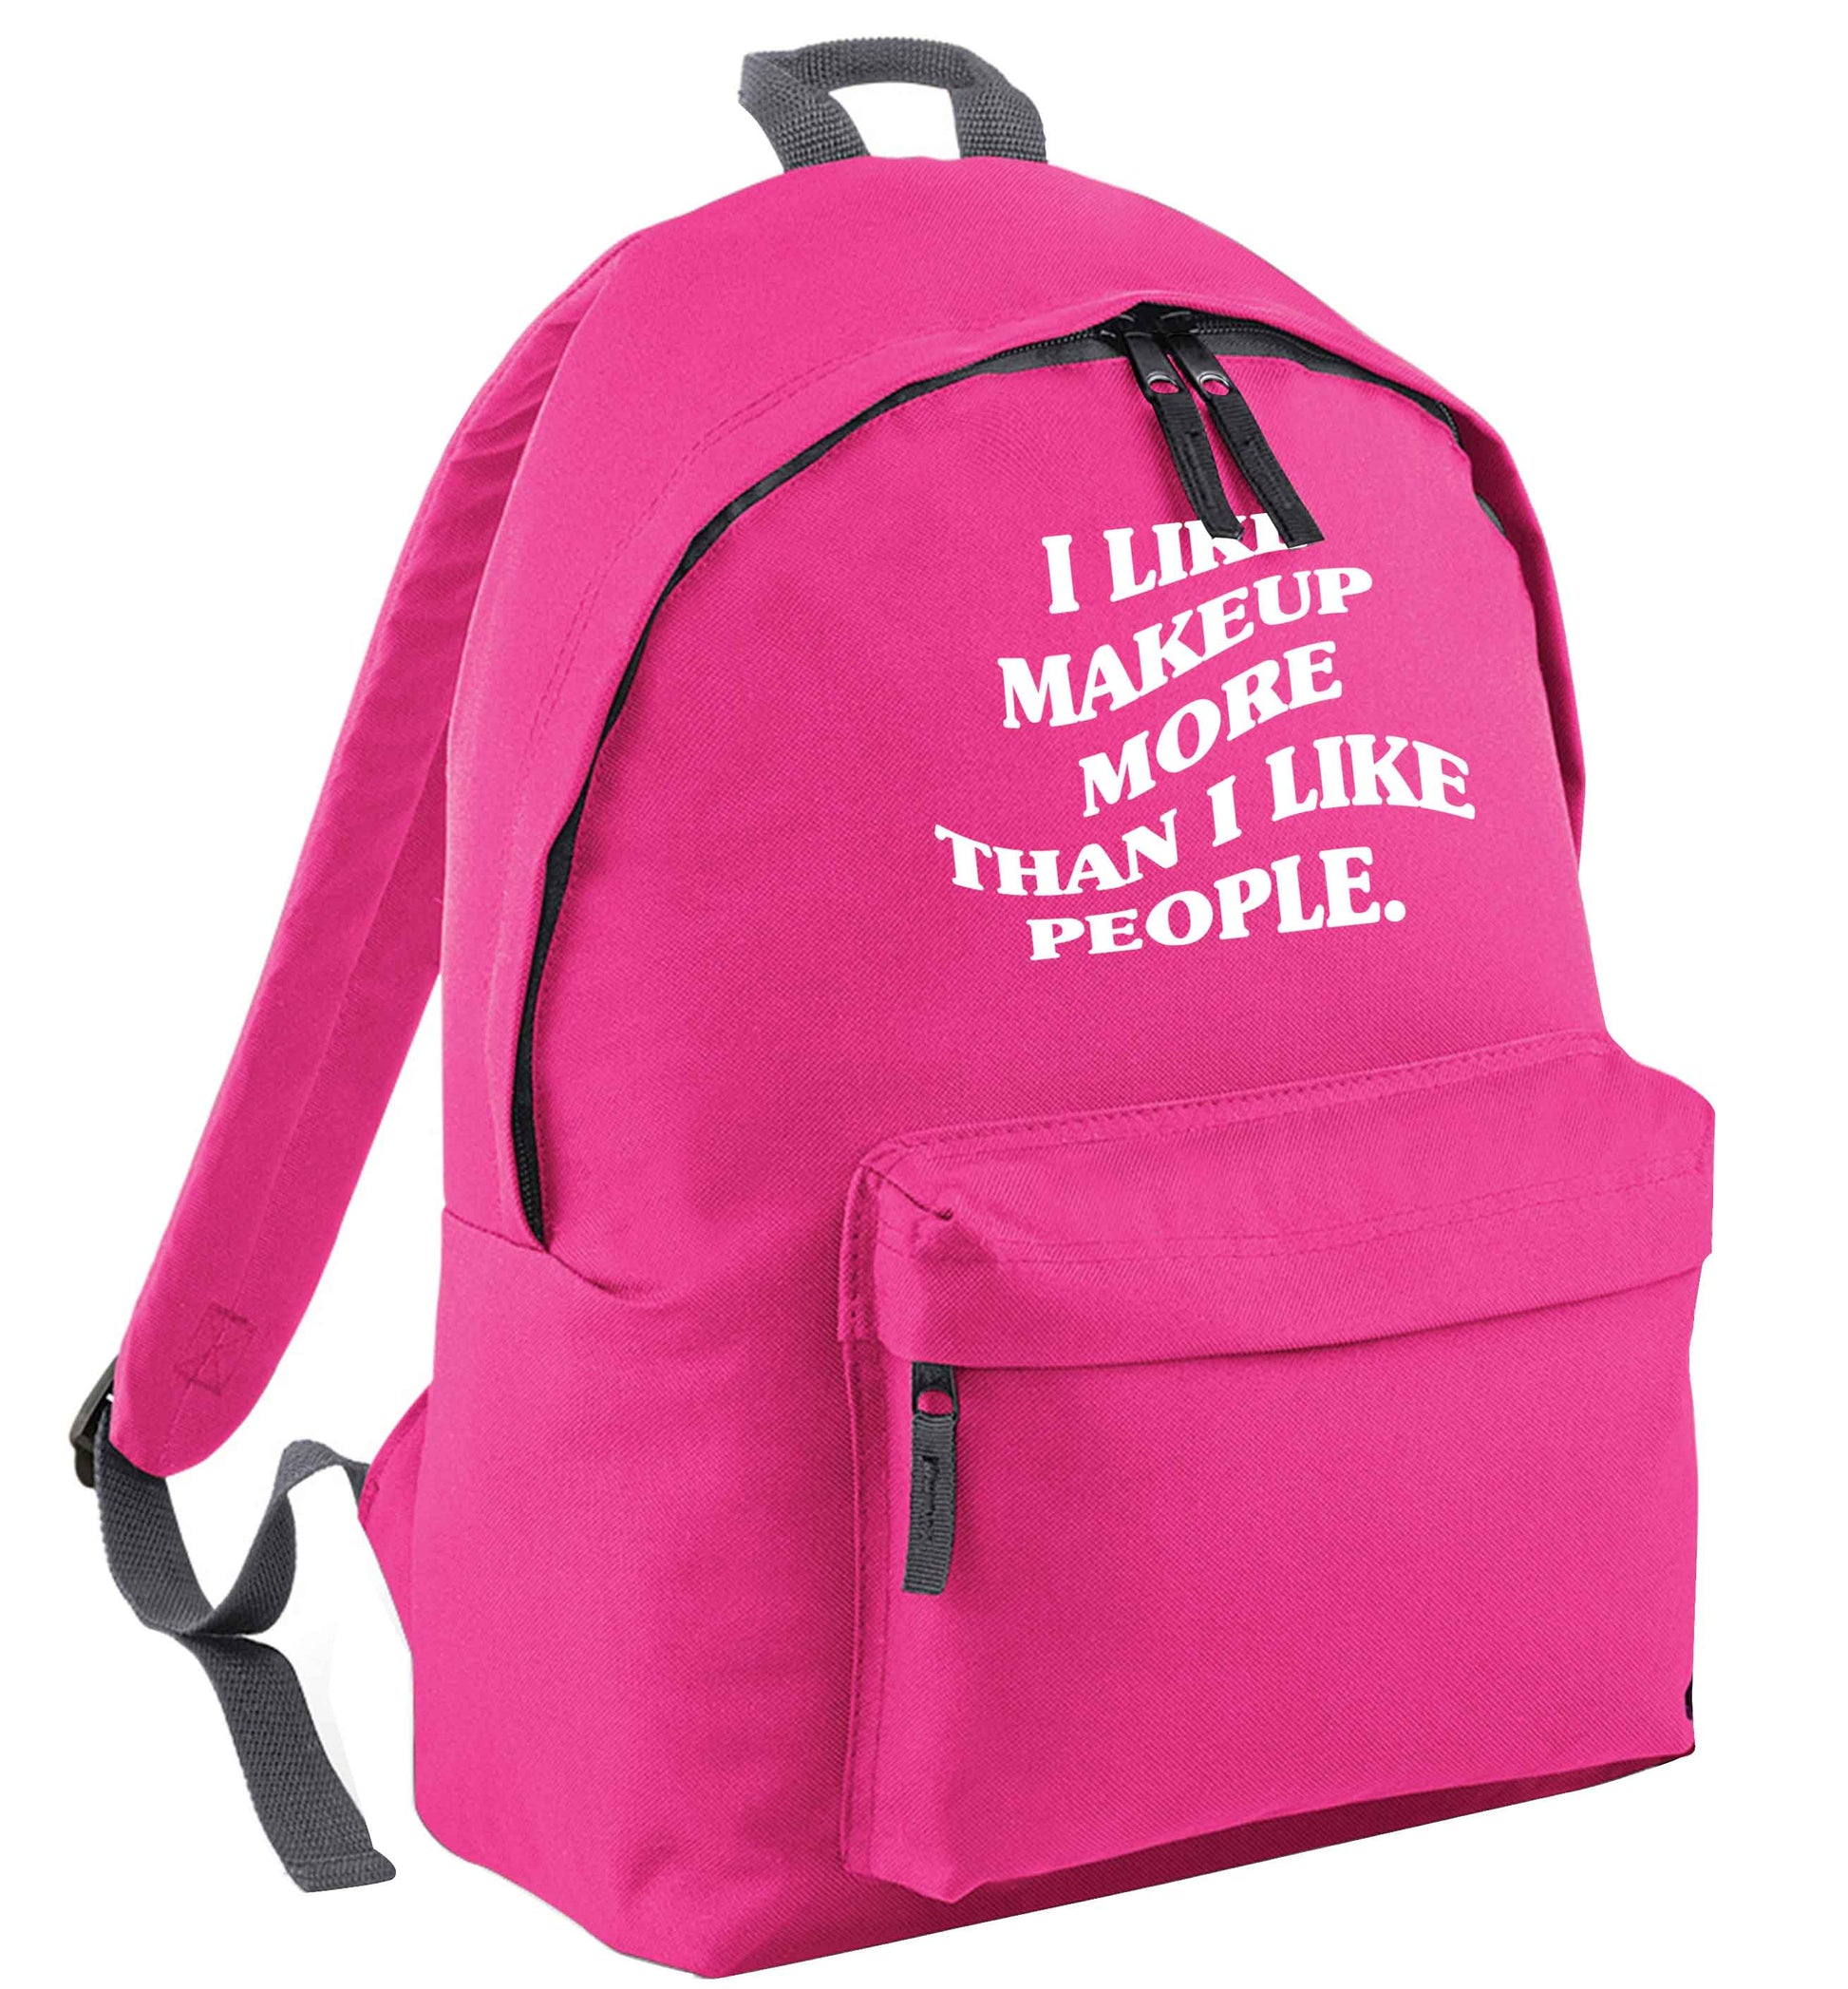 I like makeup more than people pink adults backpack